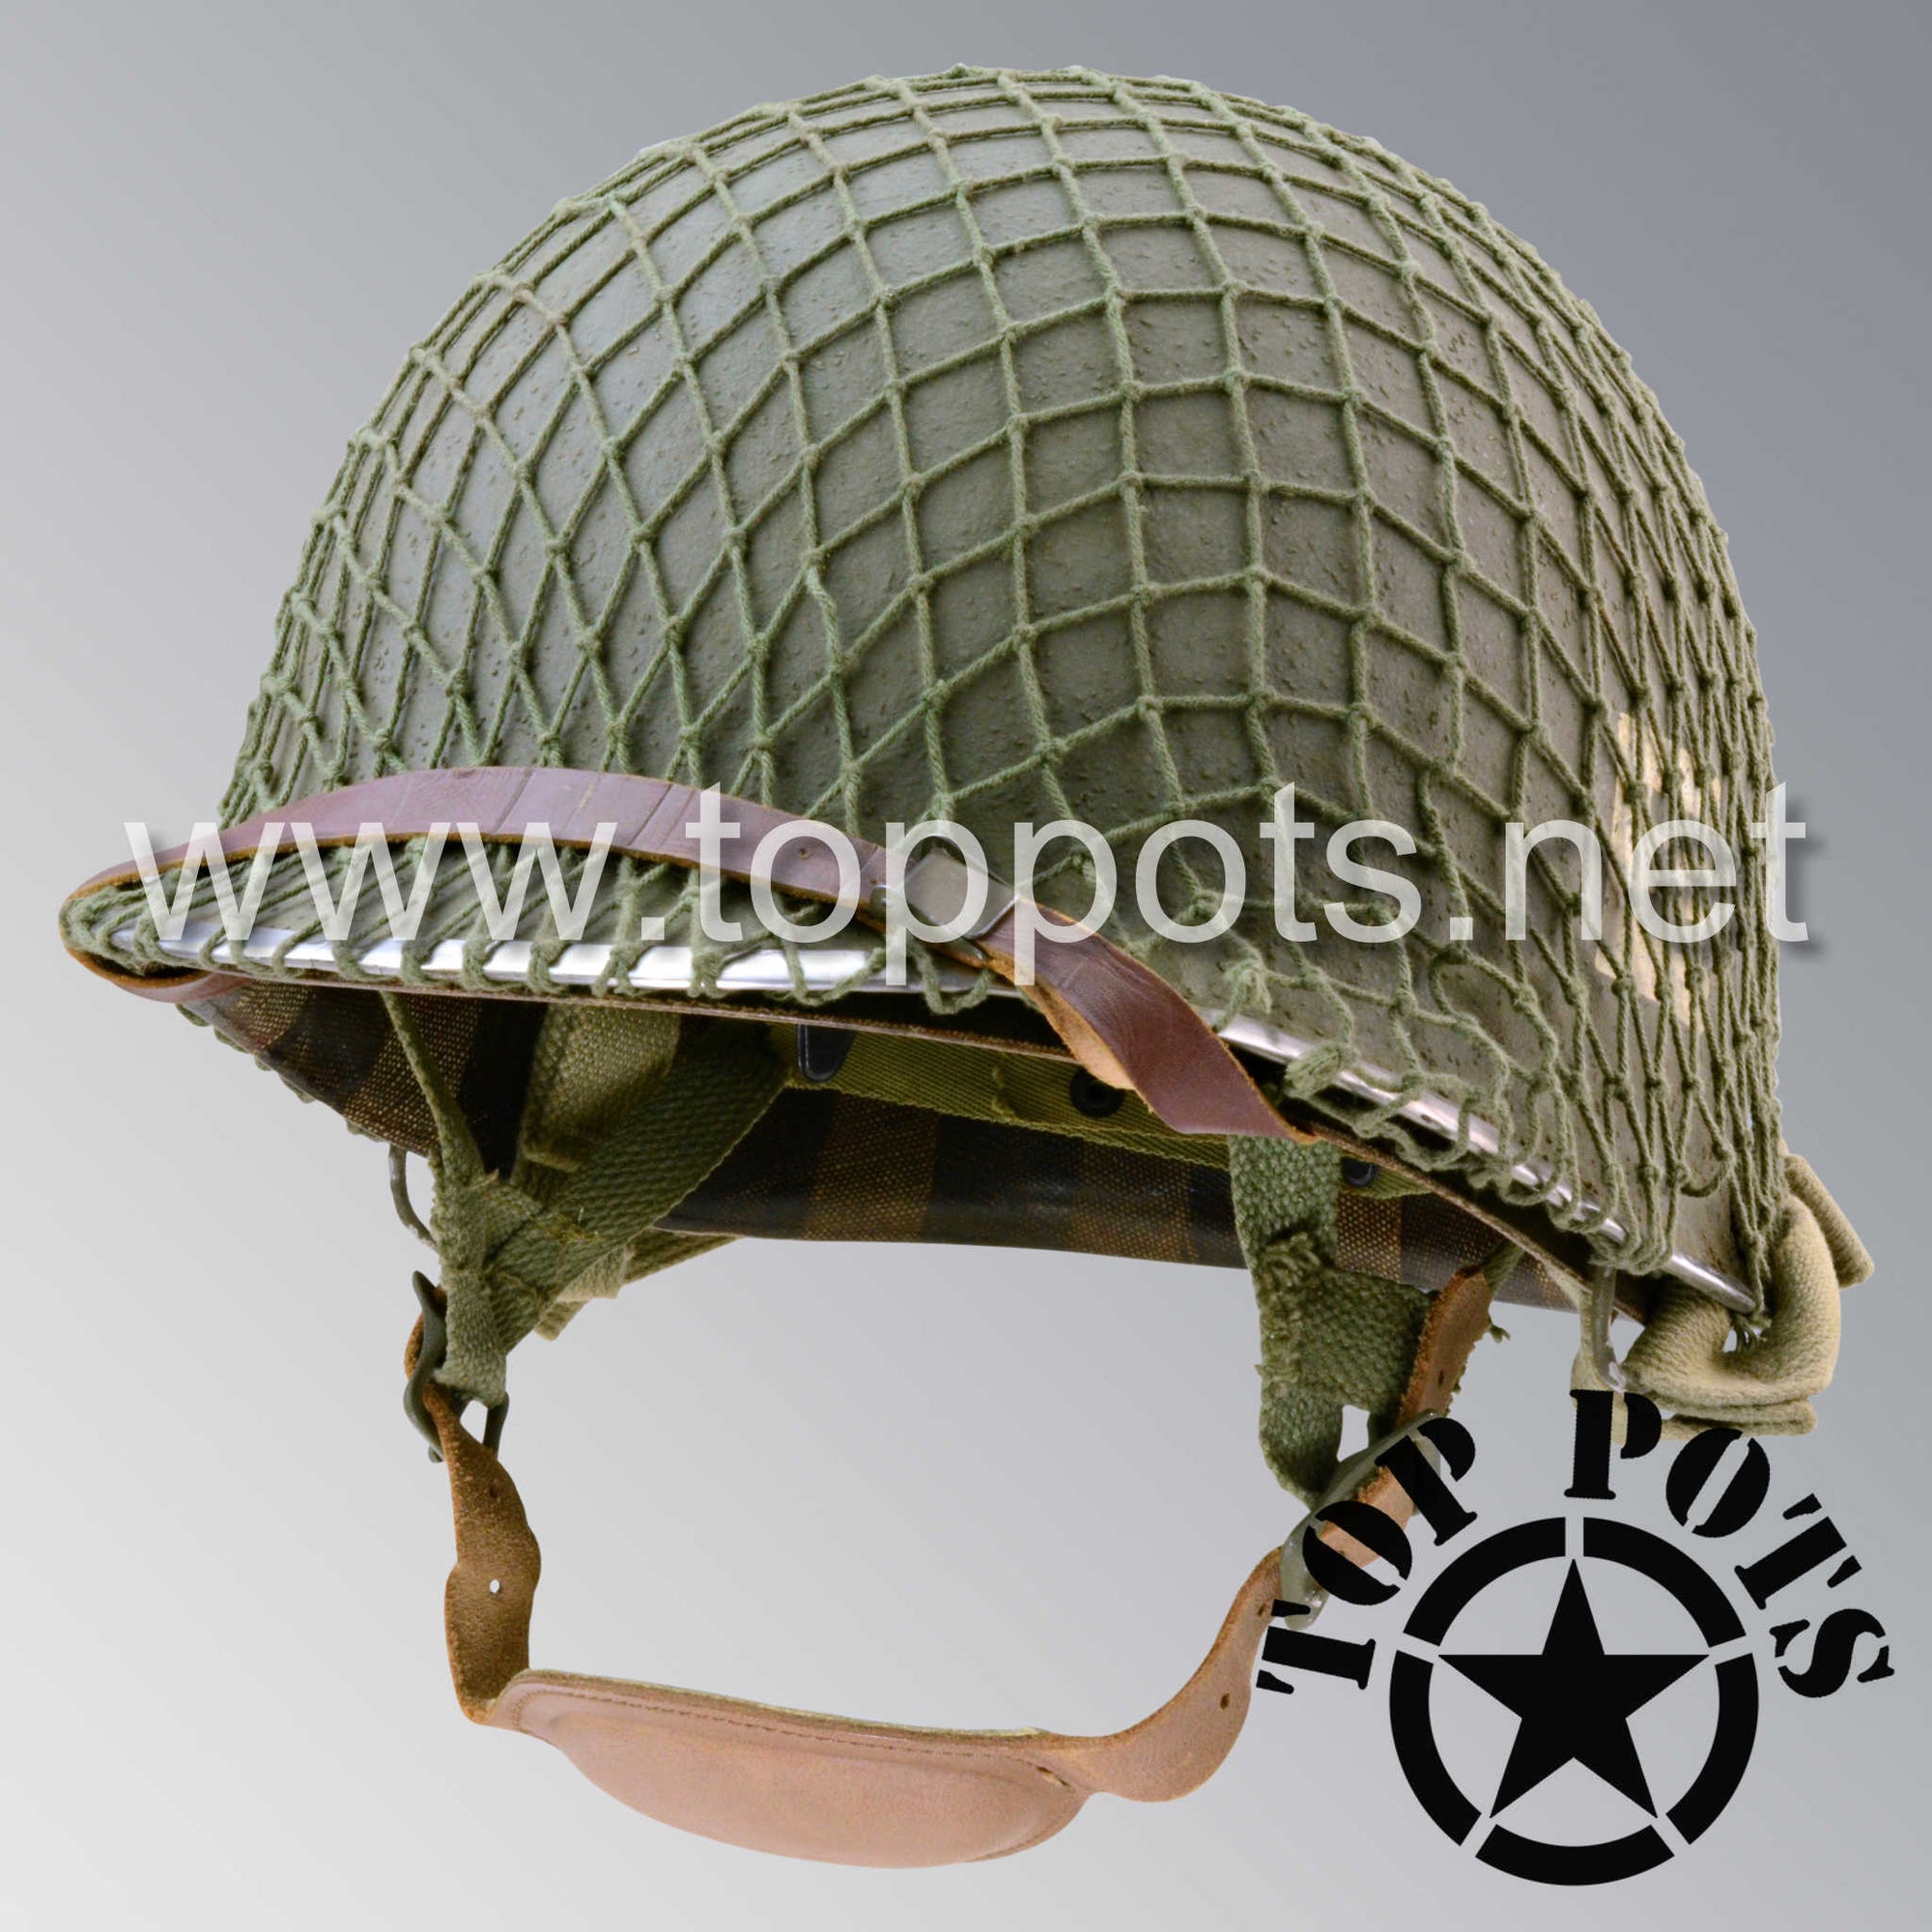 WWII US Army Aged Original M2 Paratrooper Airborne Helmet D Bale Shell and Liner with 326th Airborne Engineer Battalion AEB Emblem and Net